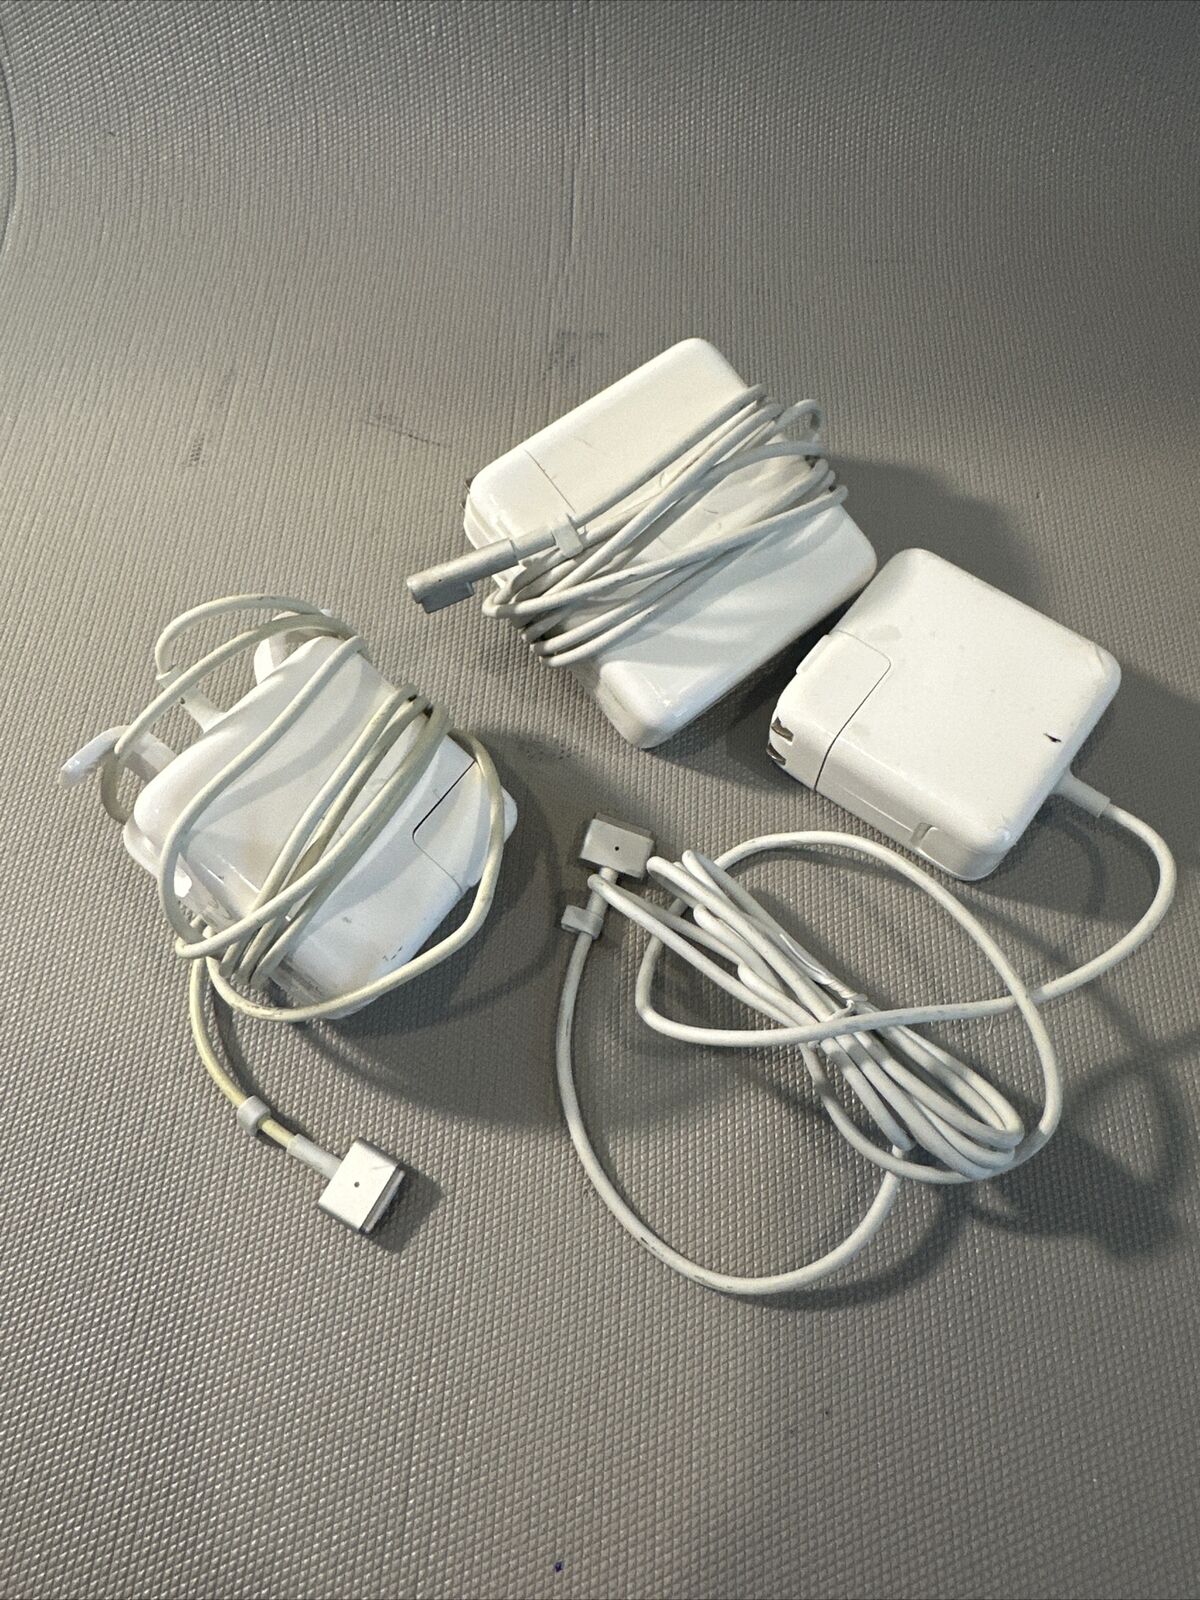 Lot of Three MacBook Chargers